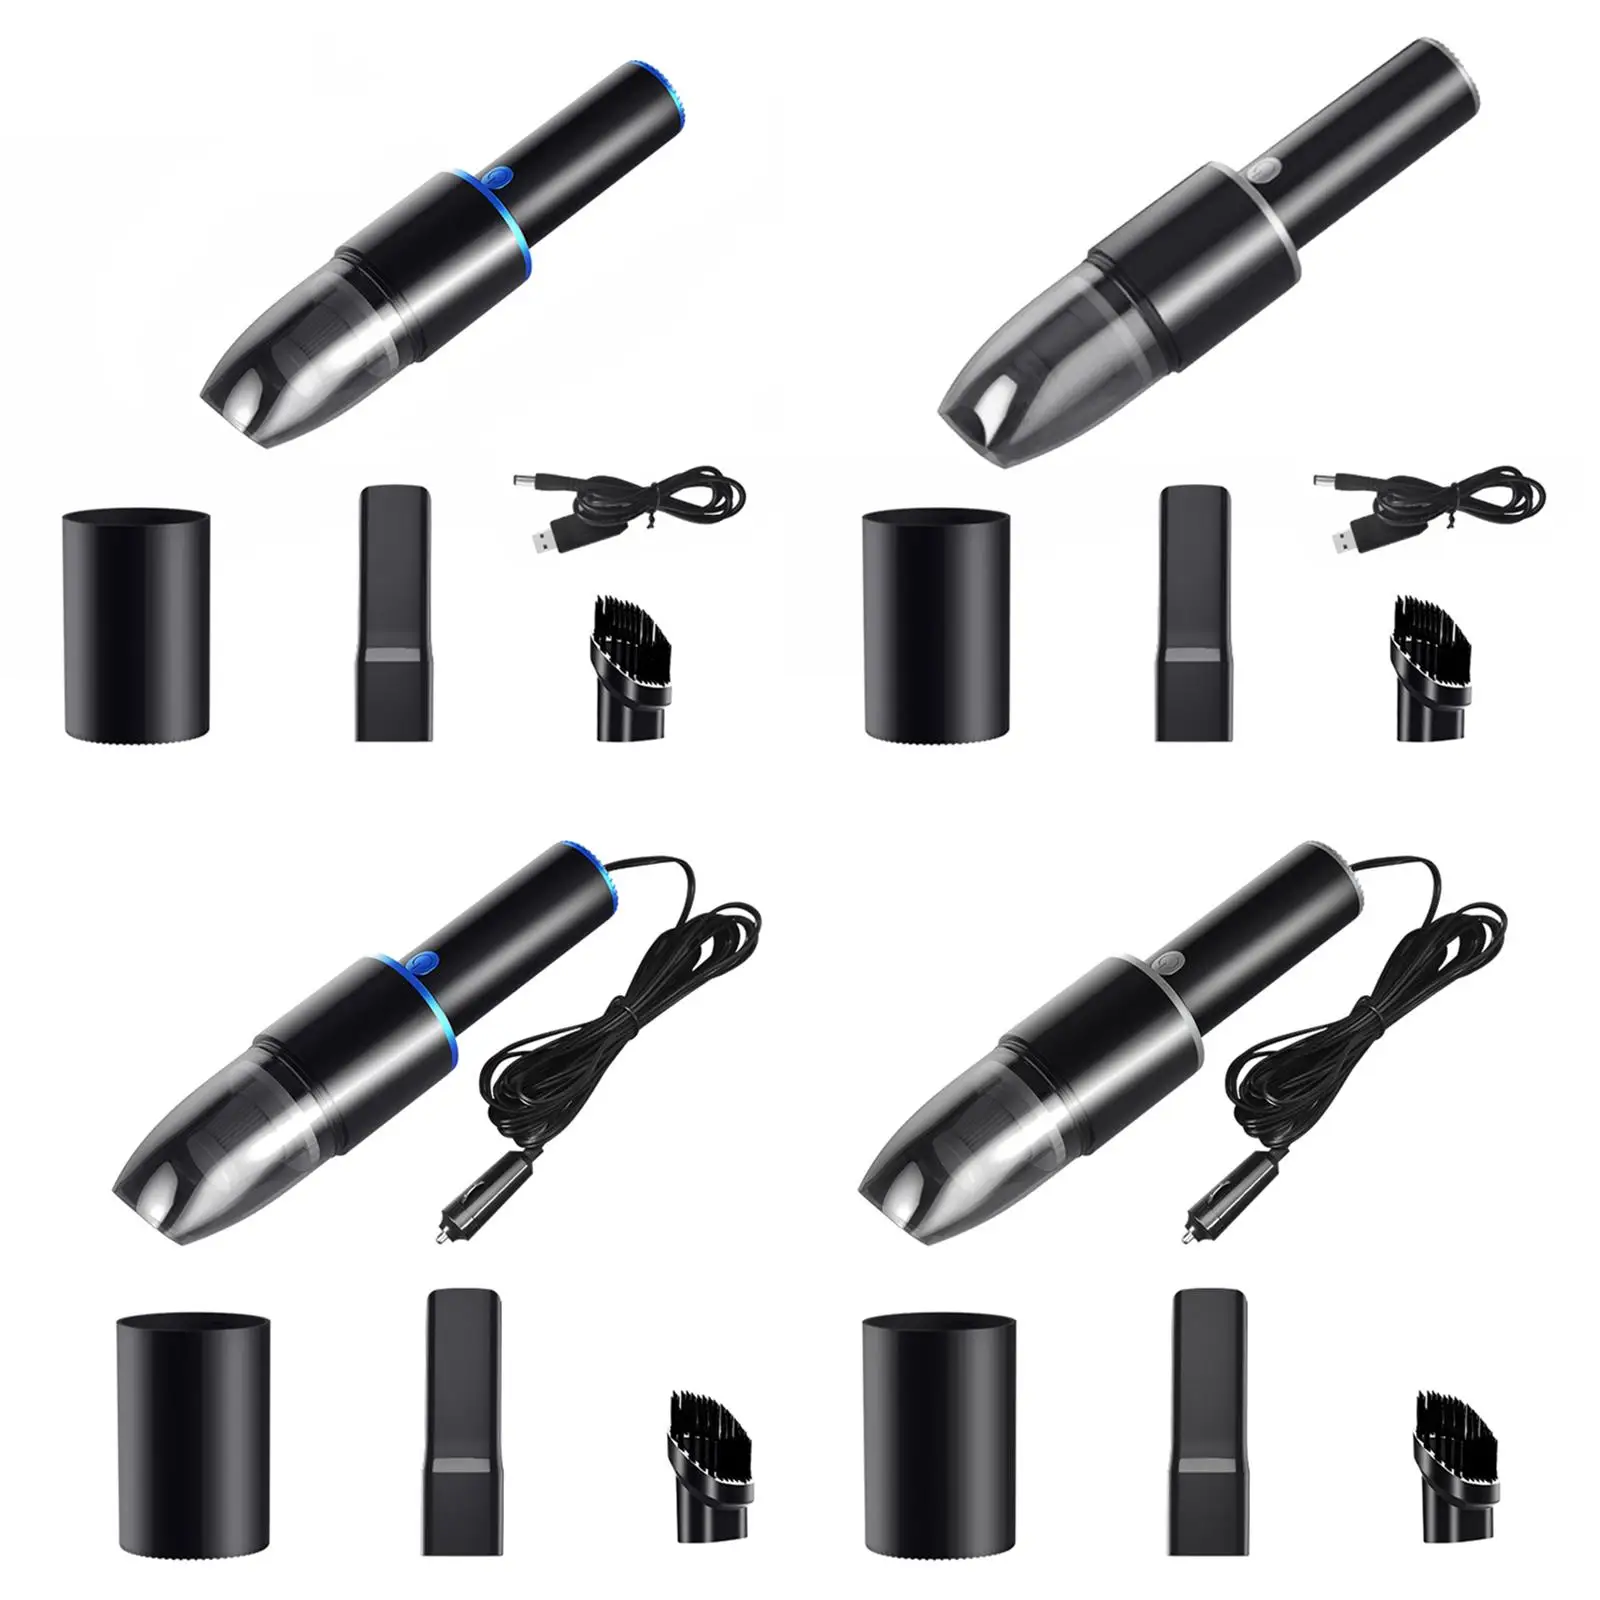 Portable Car Vacuum Cleaner Small Washable Handheld Vacuum for Office Crevices Pet Hair USB Rechargeable Fast Charge